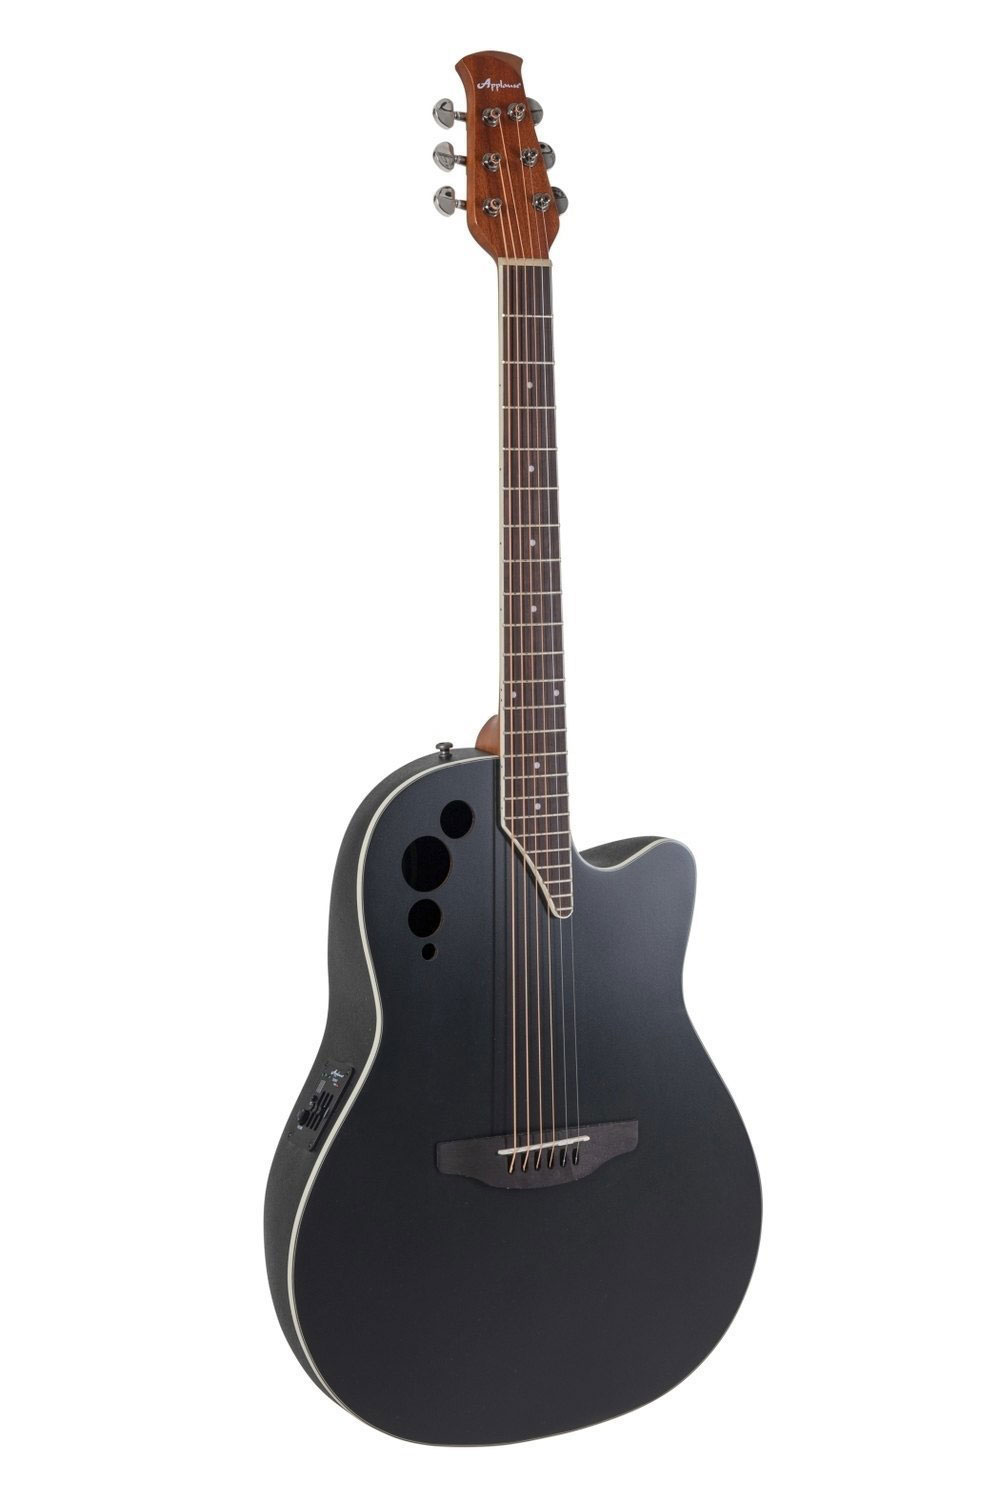 Applause by Ovation AE44-5S (Black Satin)